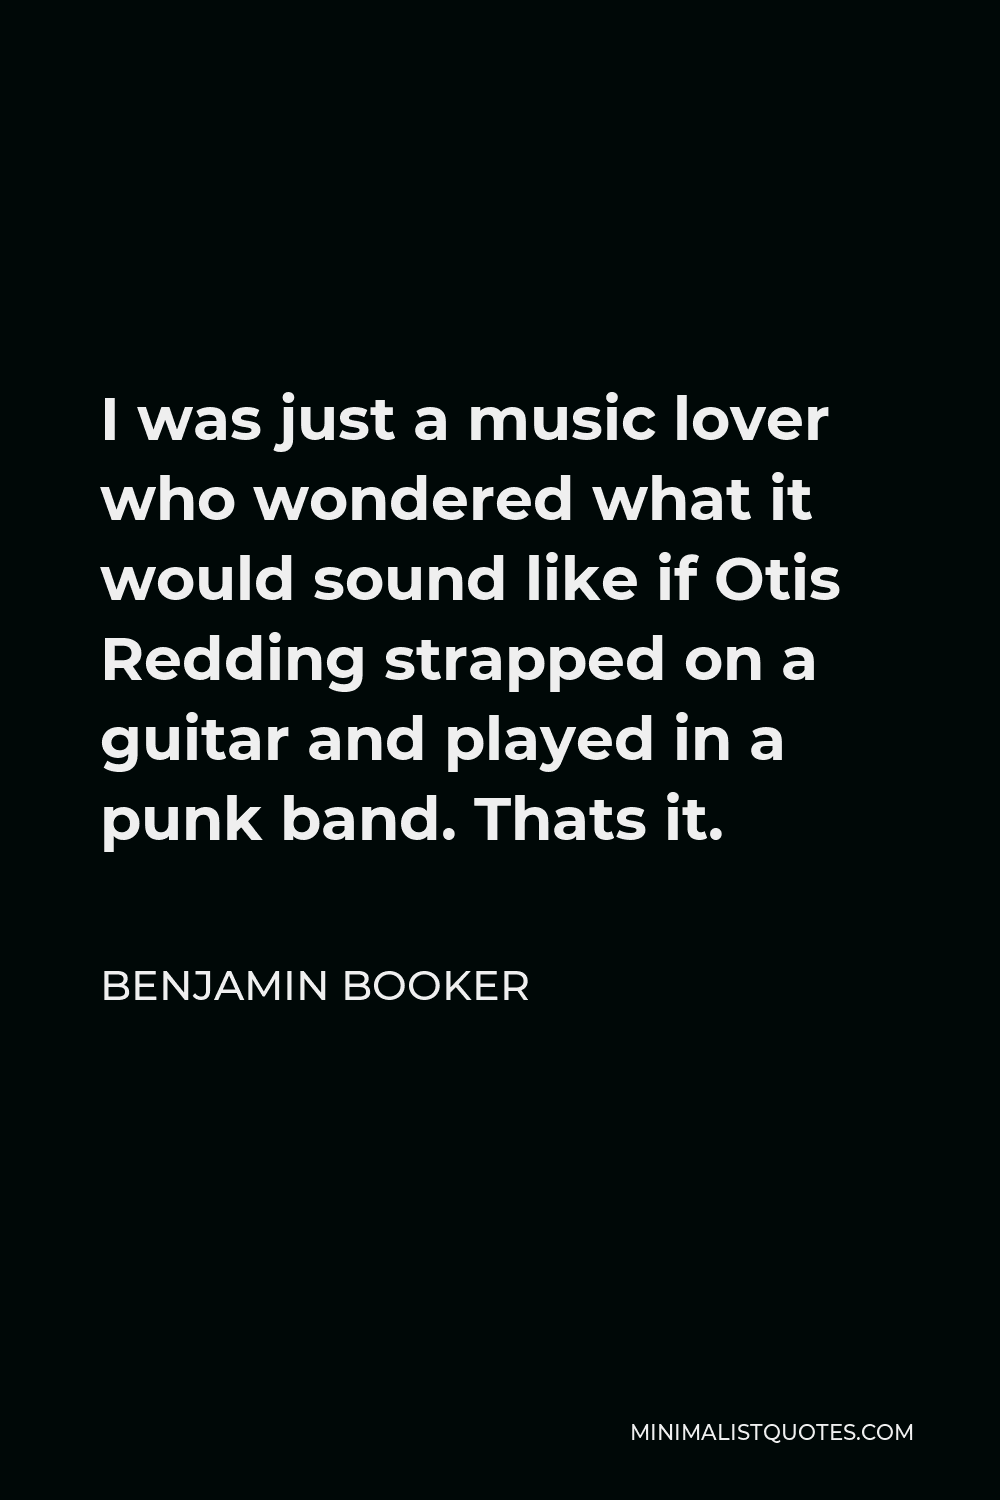 Benjamin Booker Quote - I was just a music lover who wondered what it would sound like if Otis Redding strapped on a guitar and played in a punk band. Thats it.